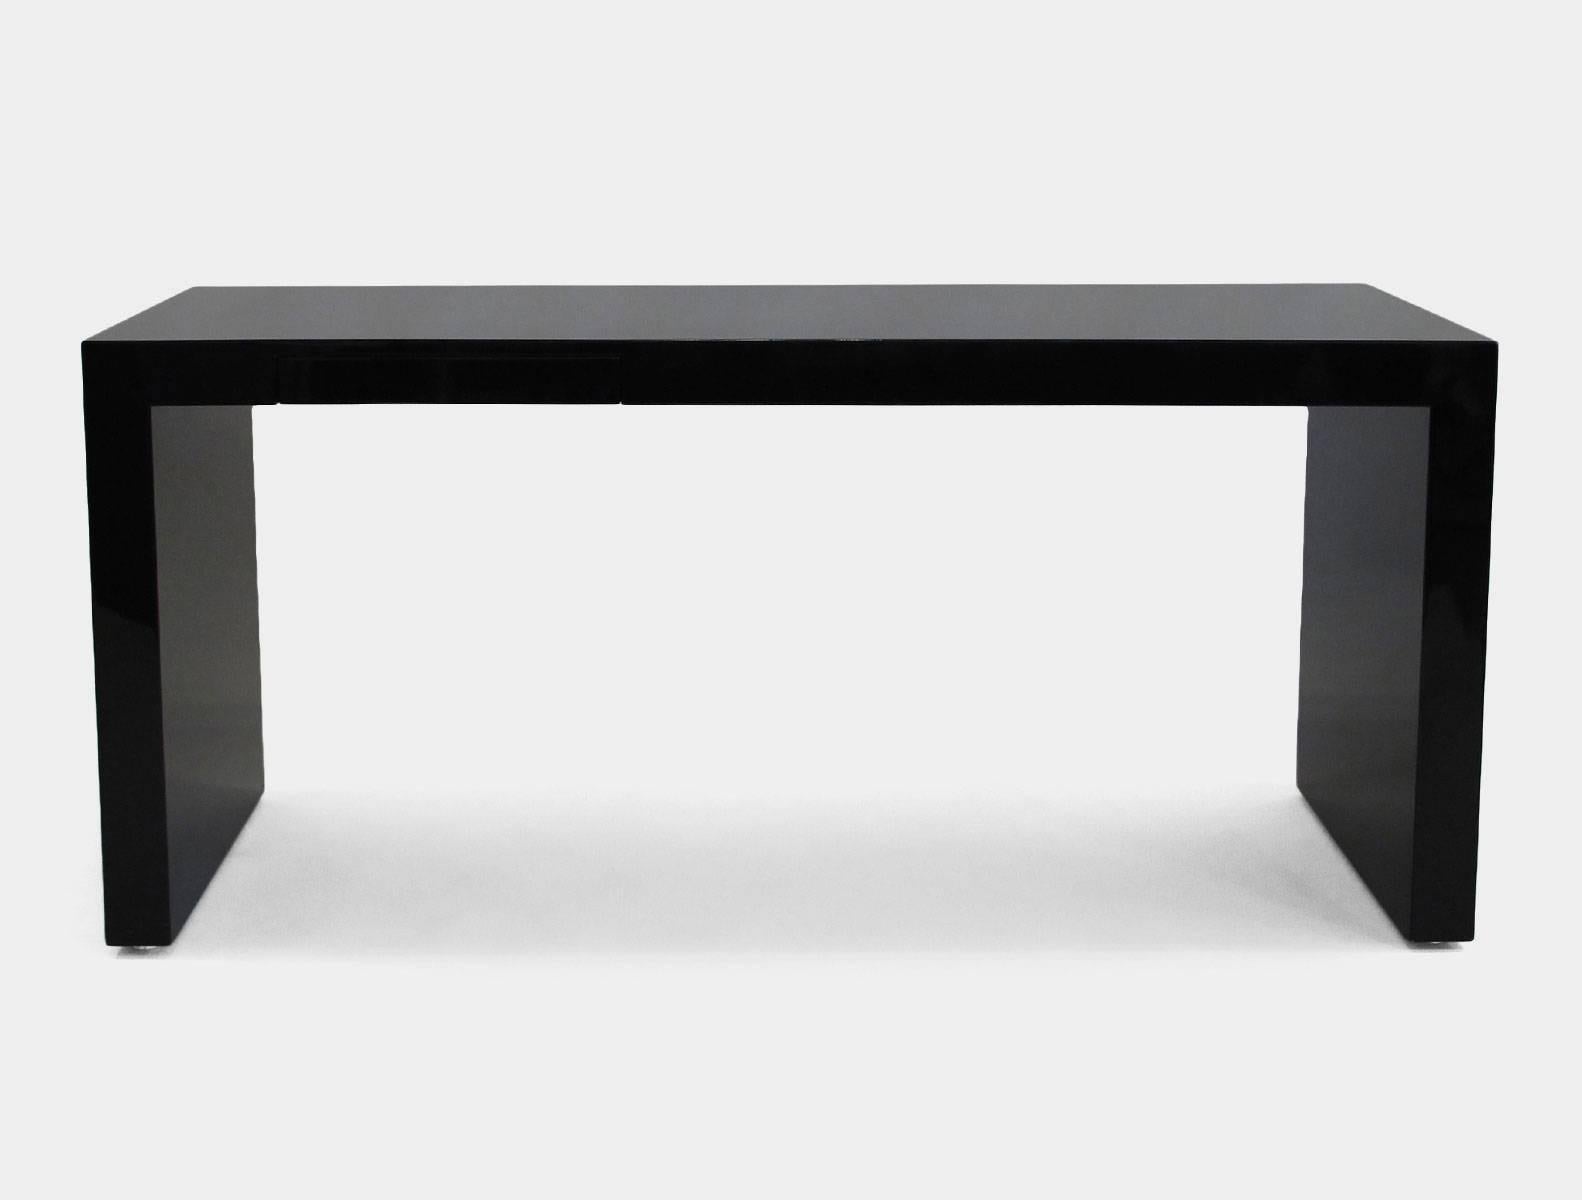 Large, smooth, black lacquered Monolith desk with a tiny and elegant hidden pencil drawer. Designed in the 1970s by Paul Mayen for Intrex Furniture of New York City.